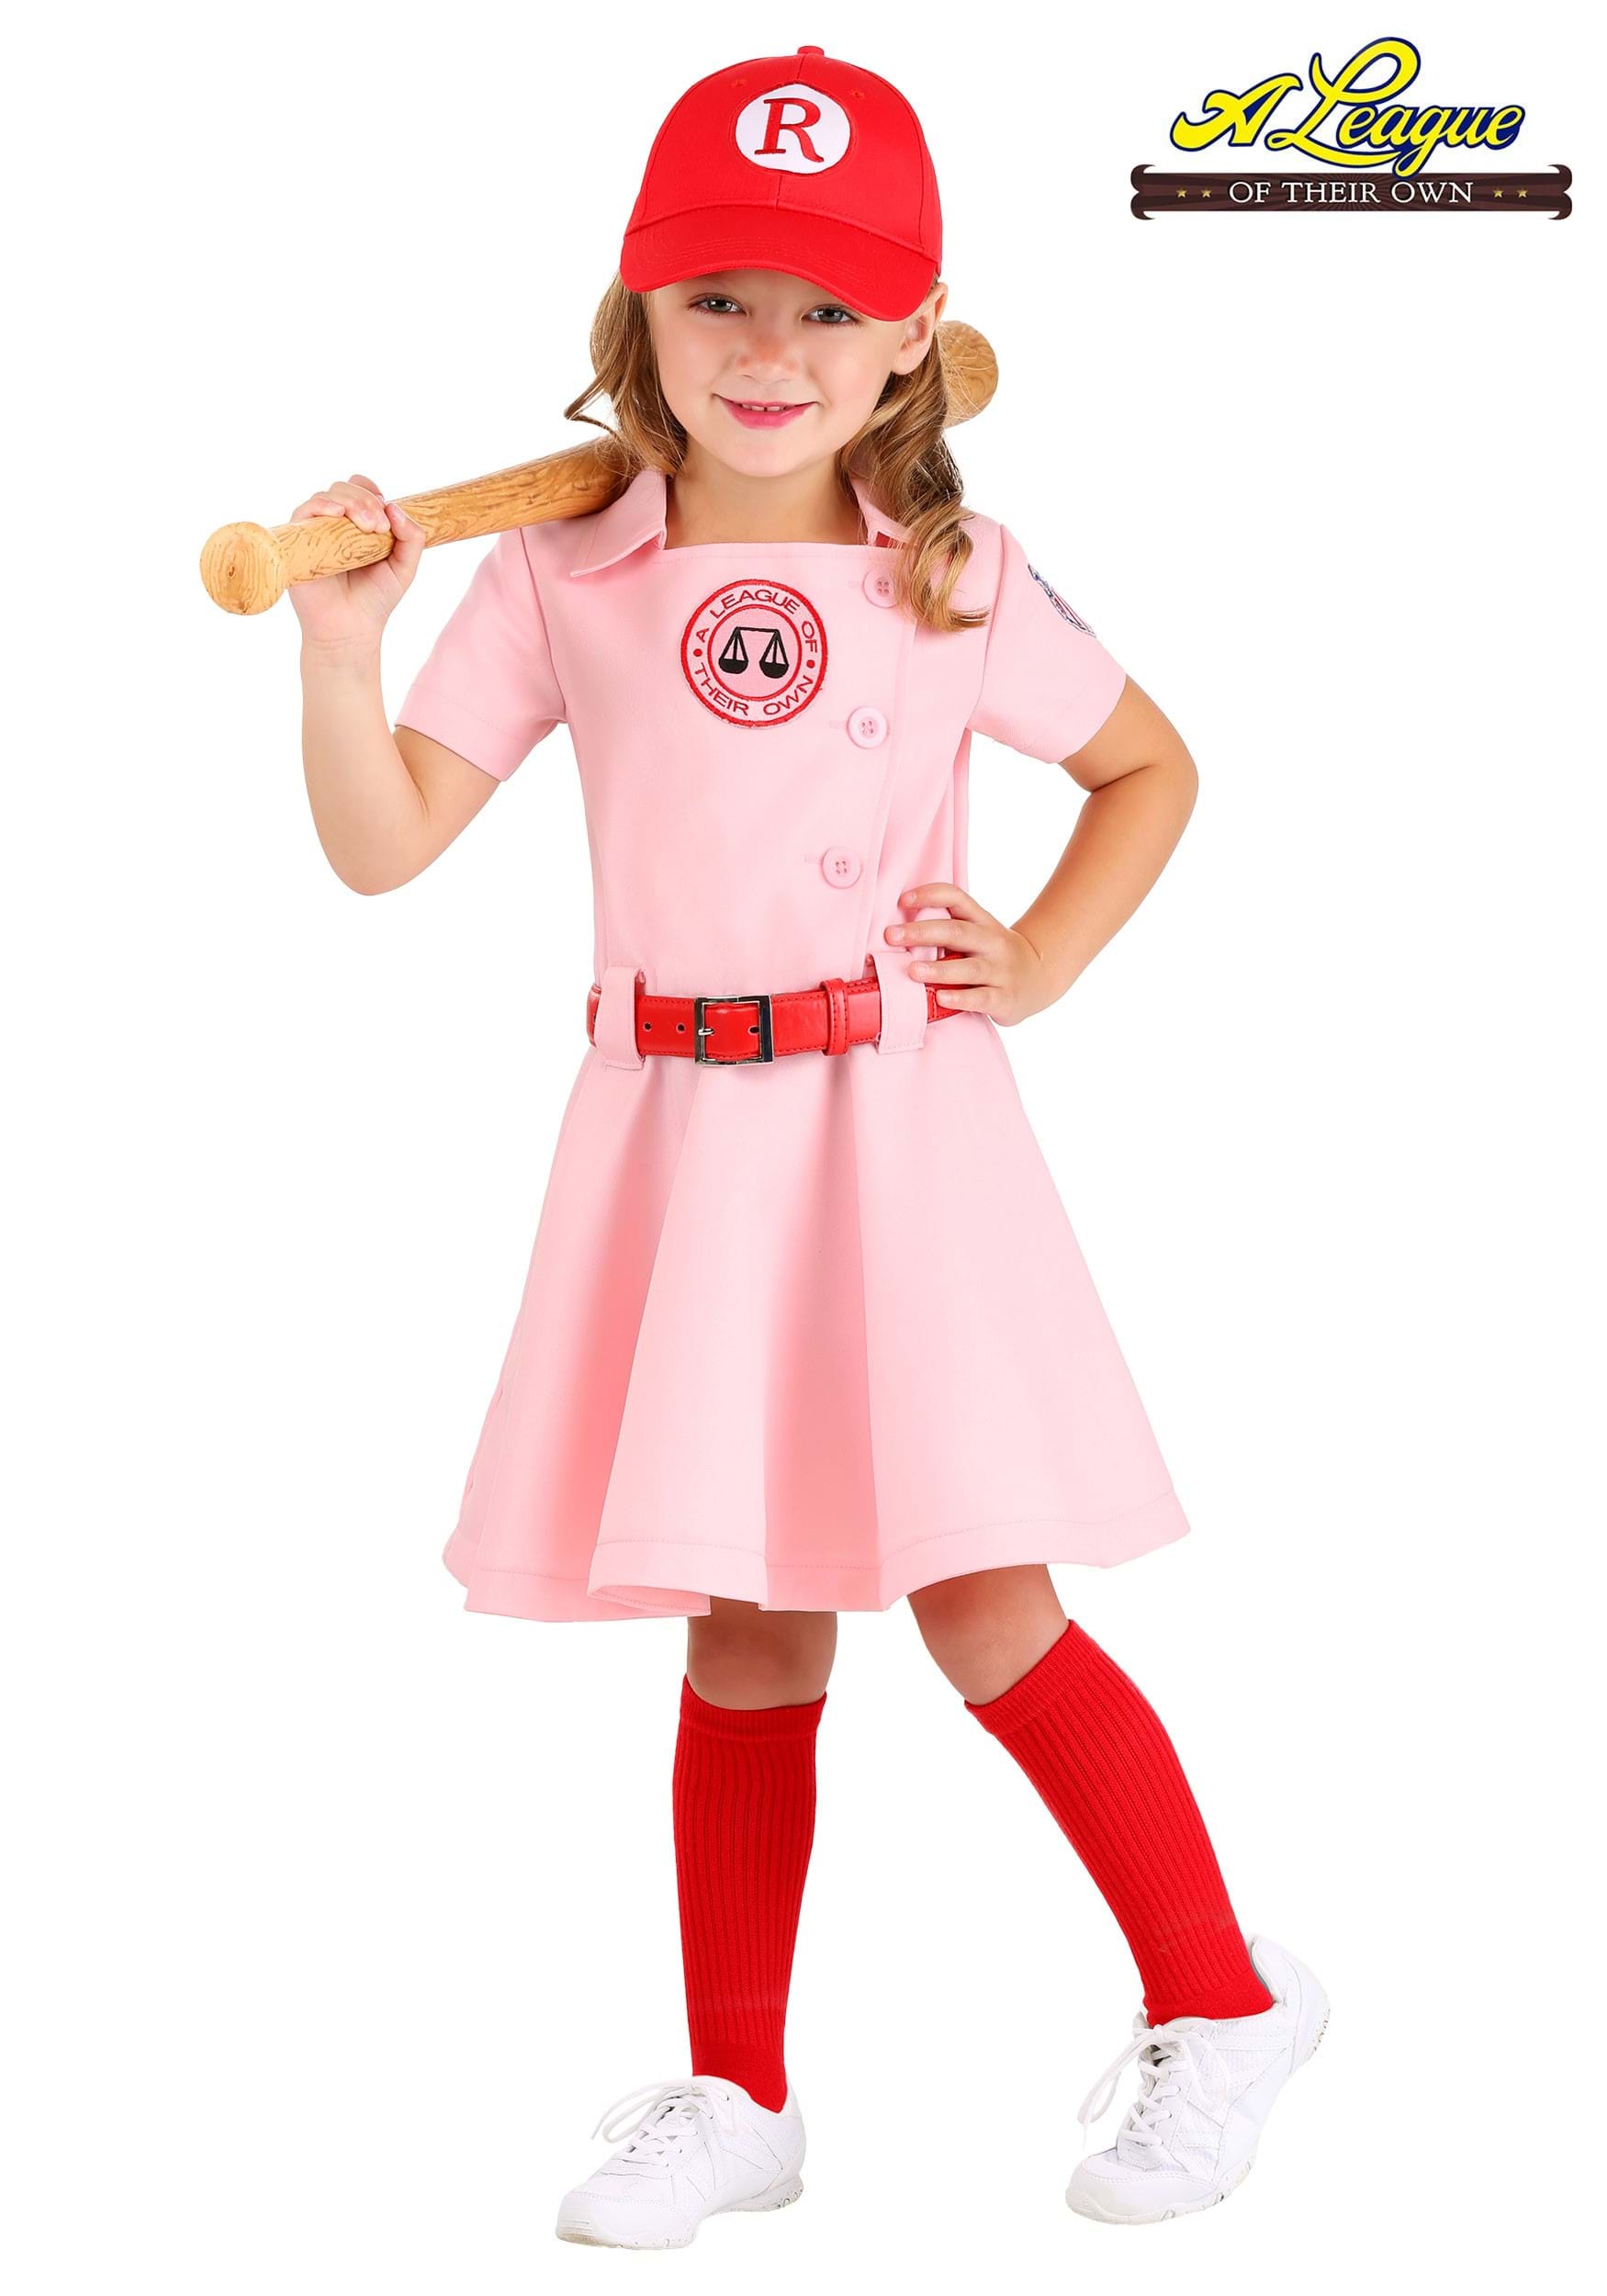 League Of Their Own Toddler Dottie Luxury Costume For Girls